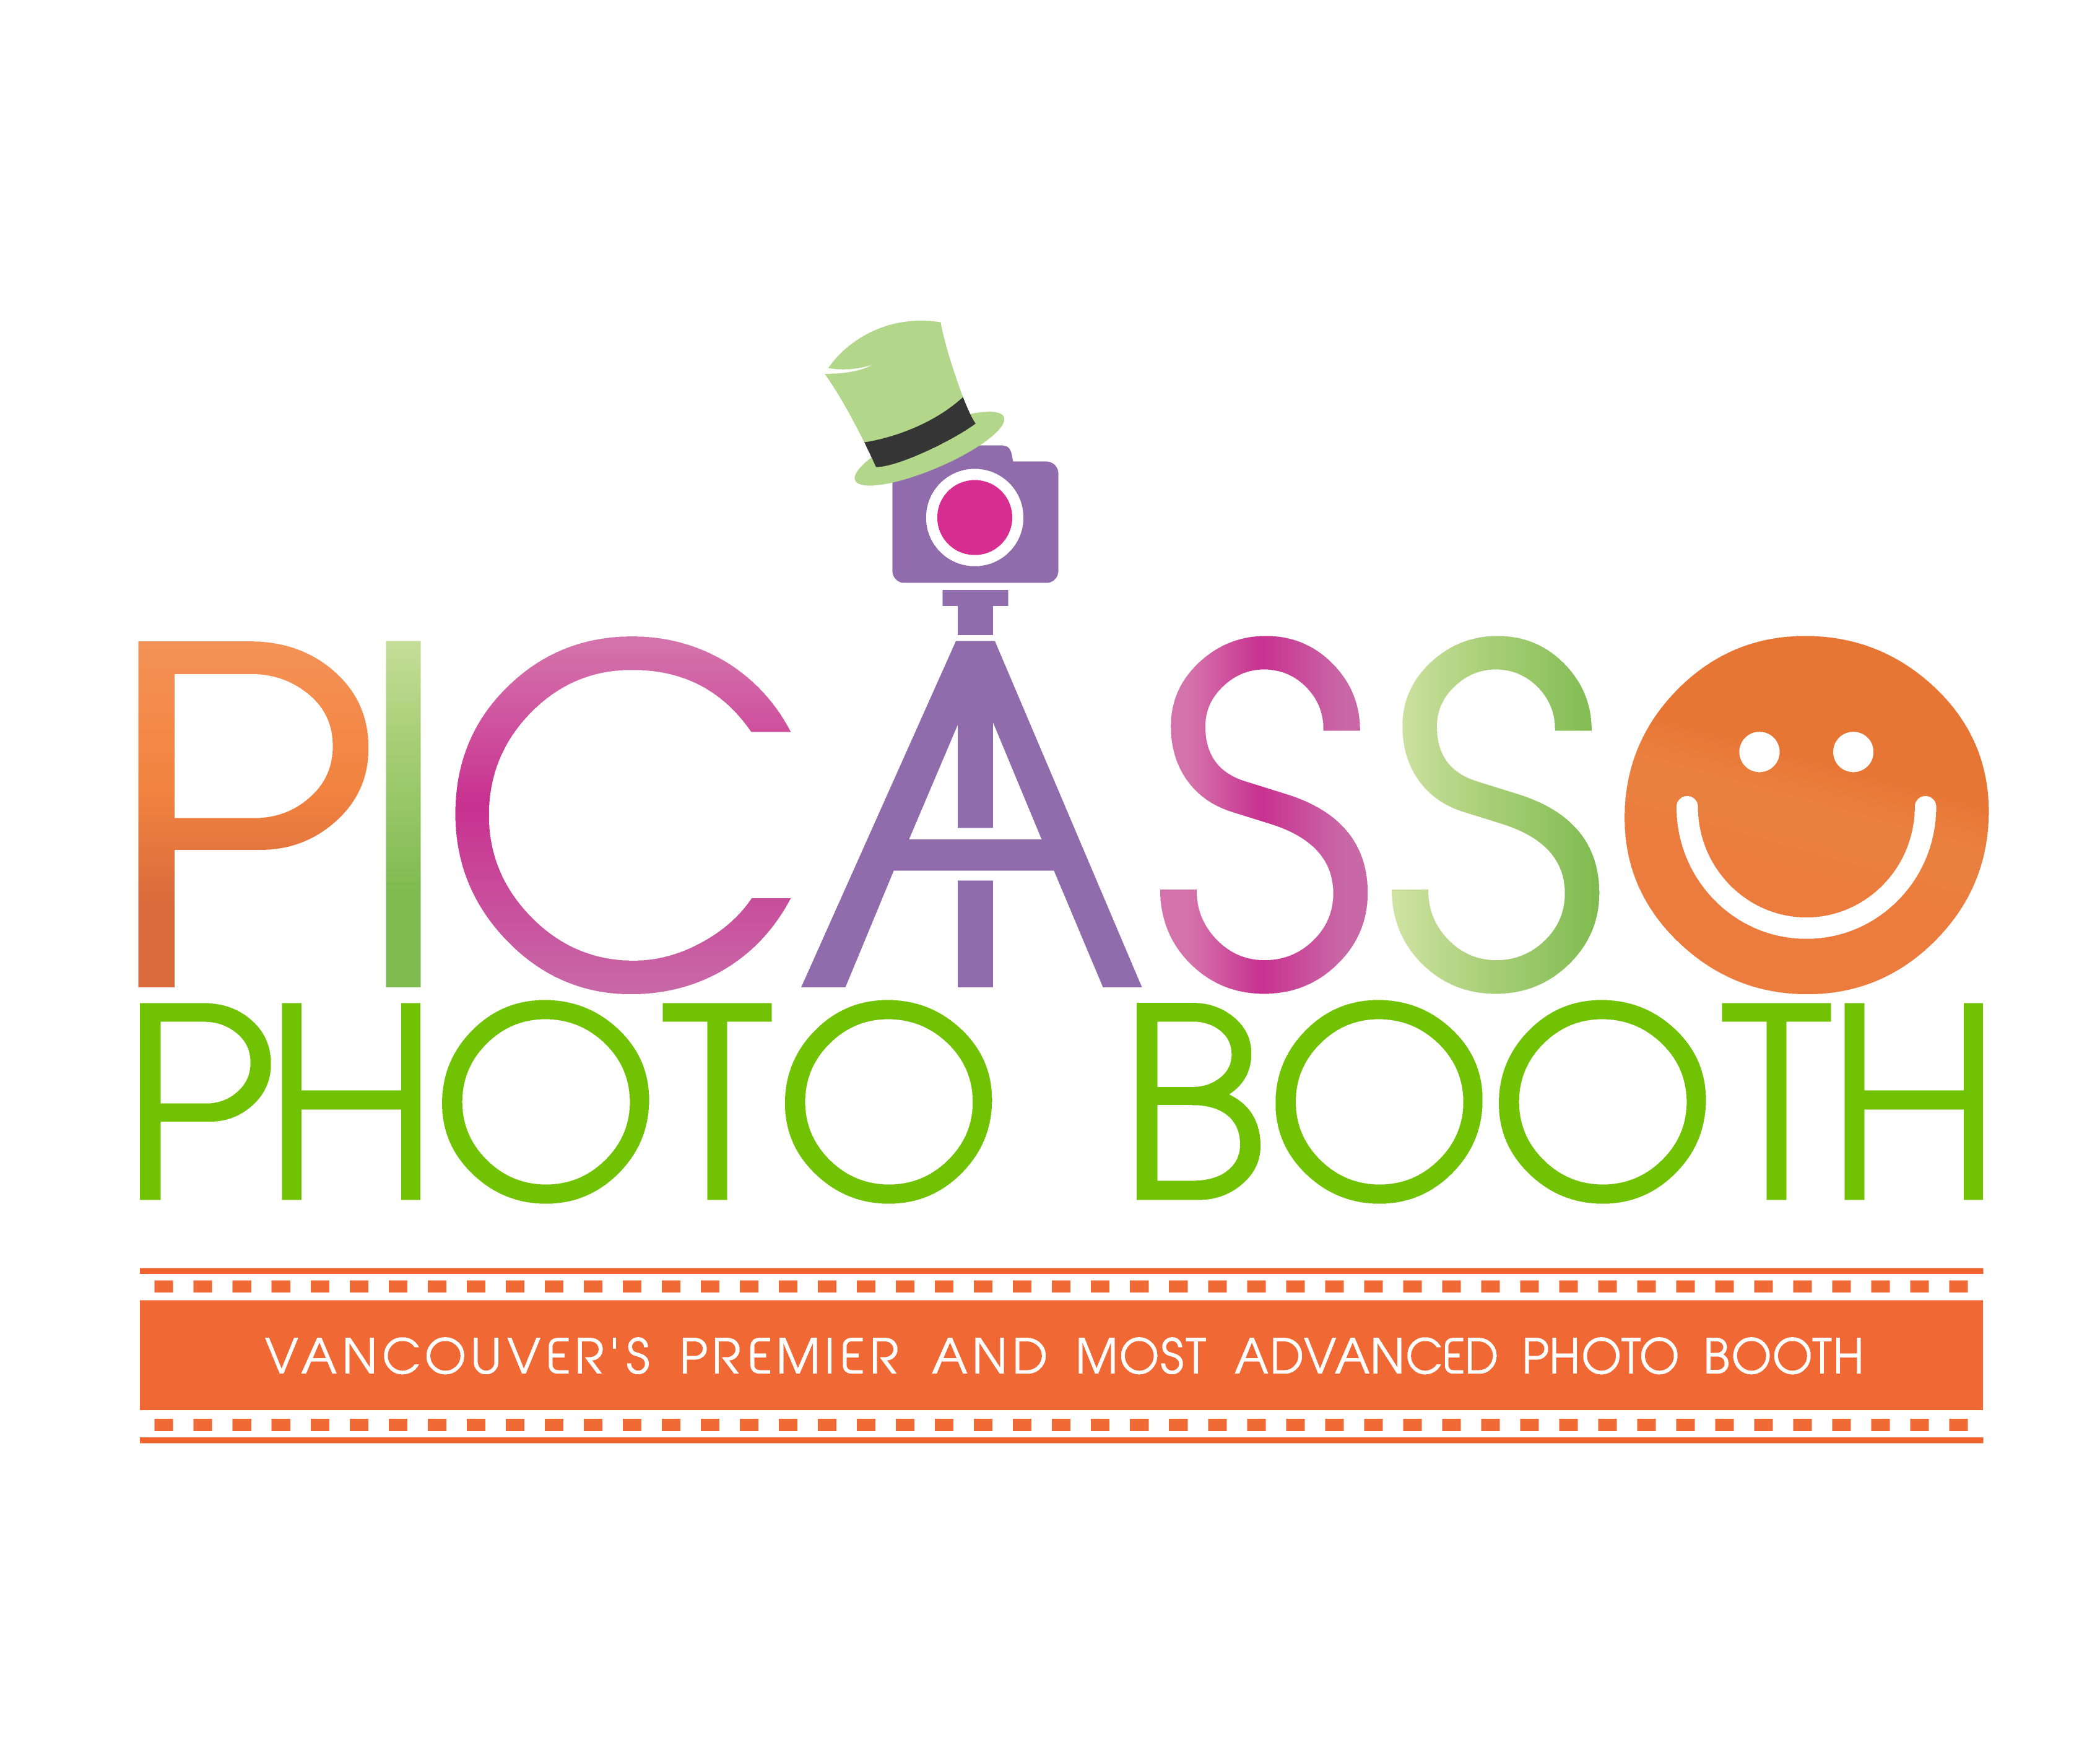 Picasso Photo Booth logo